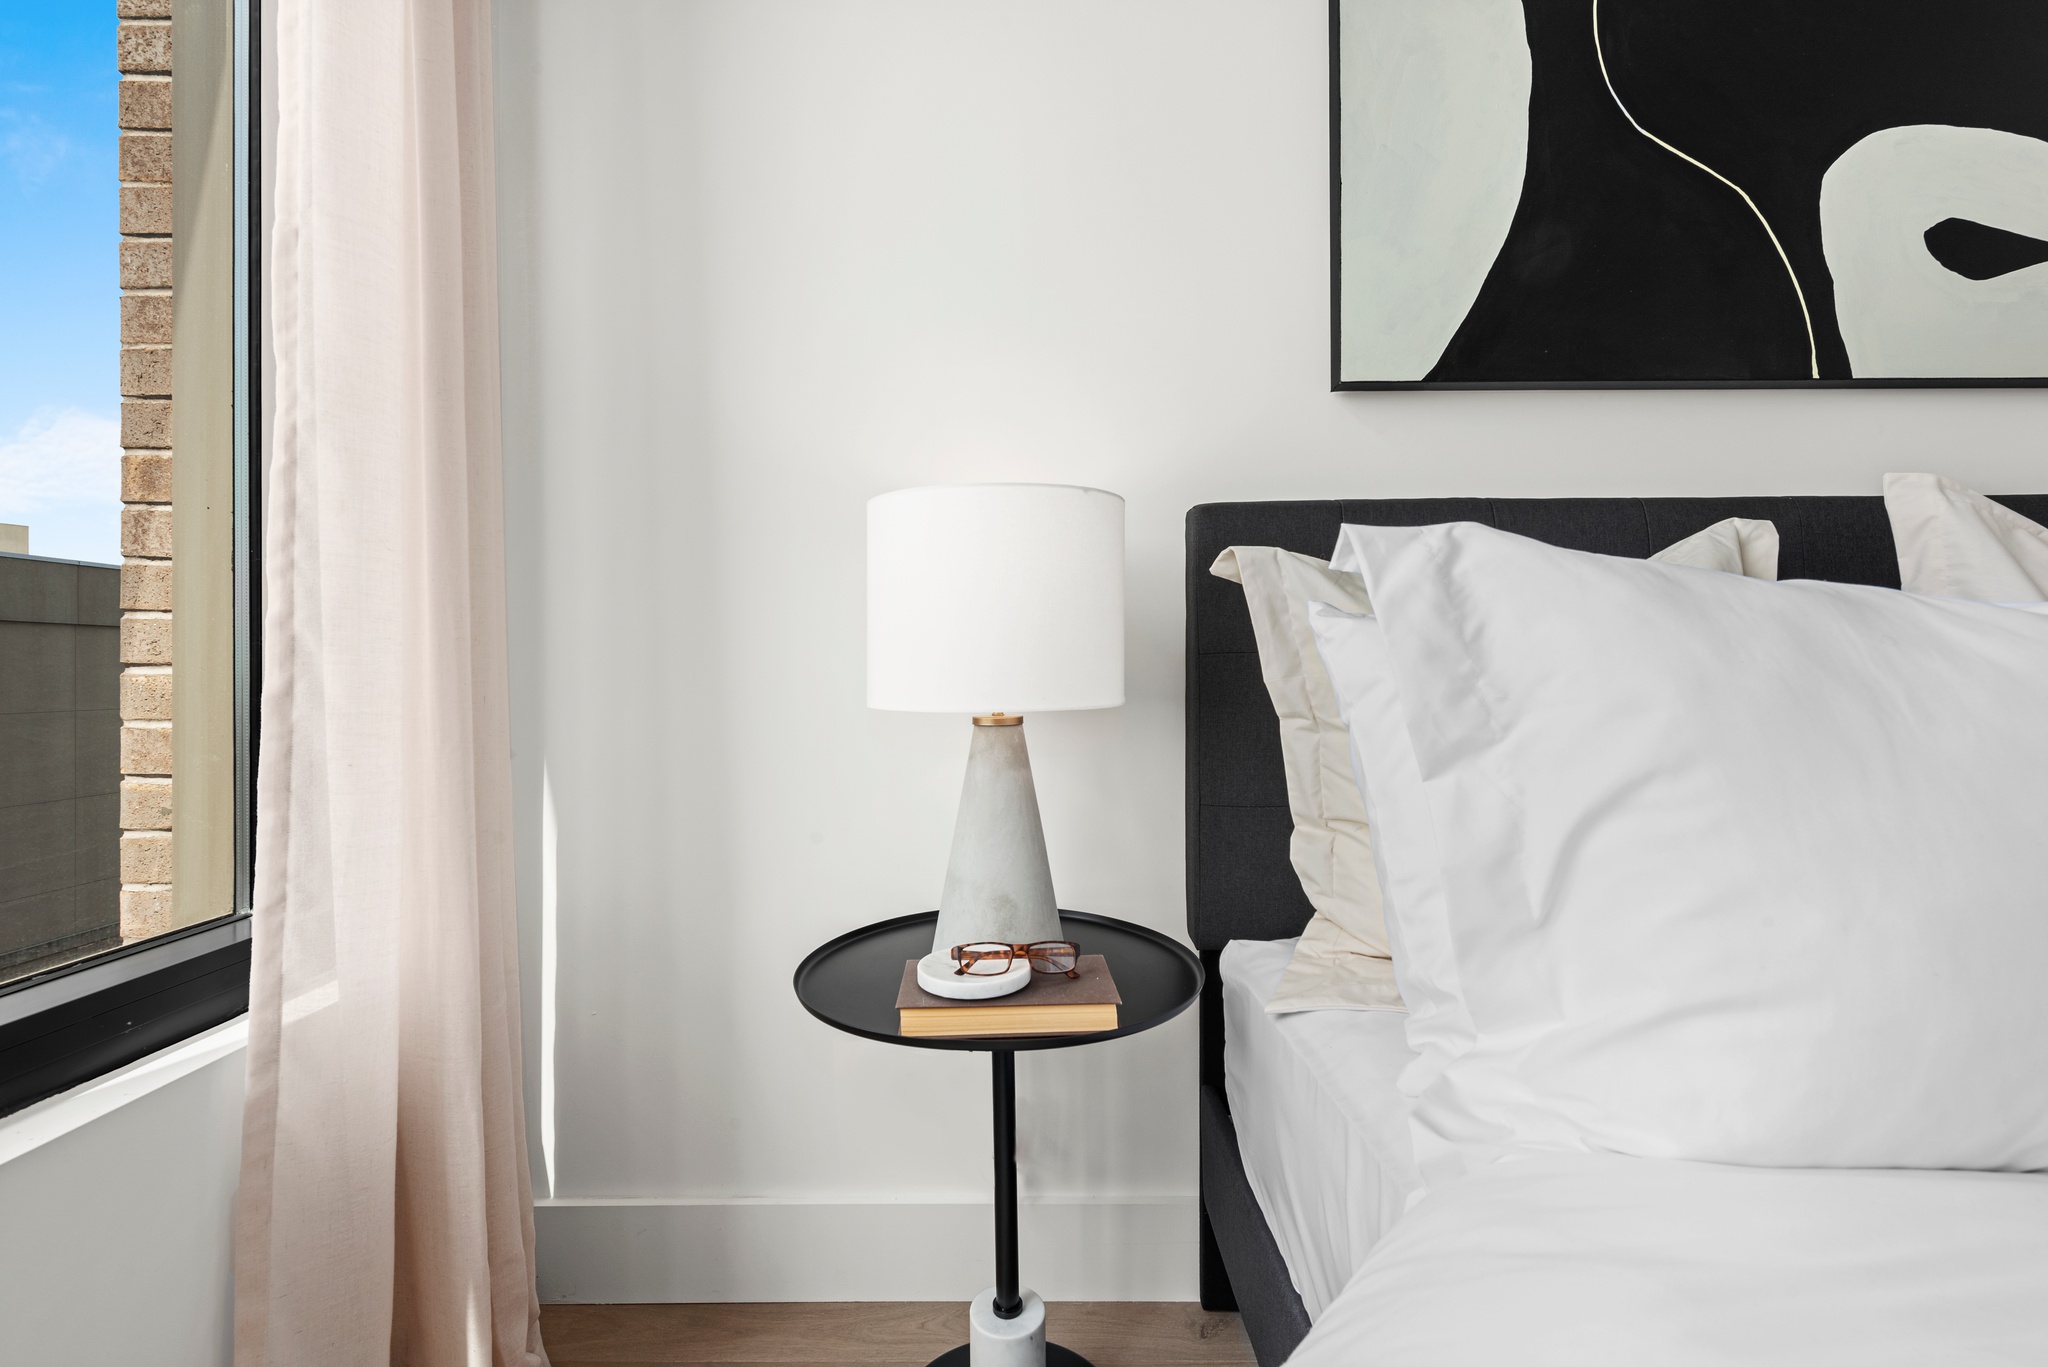 Bedroom detail of corner of dark bed frame with white bedding, side table with lamp, book and glasses and partial window with light curtains